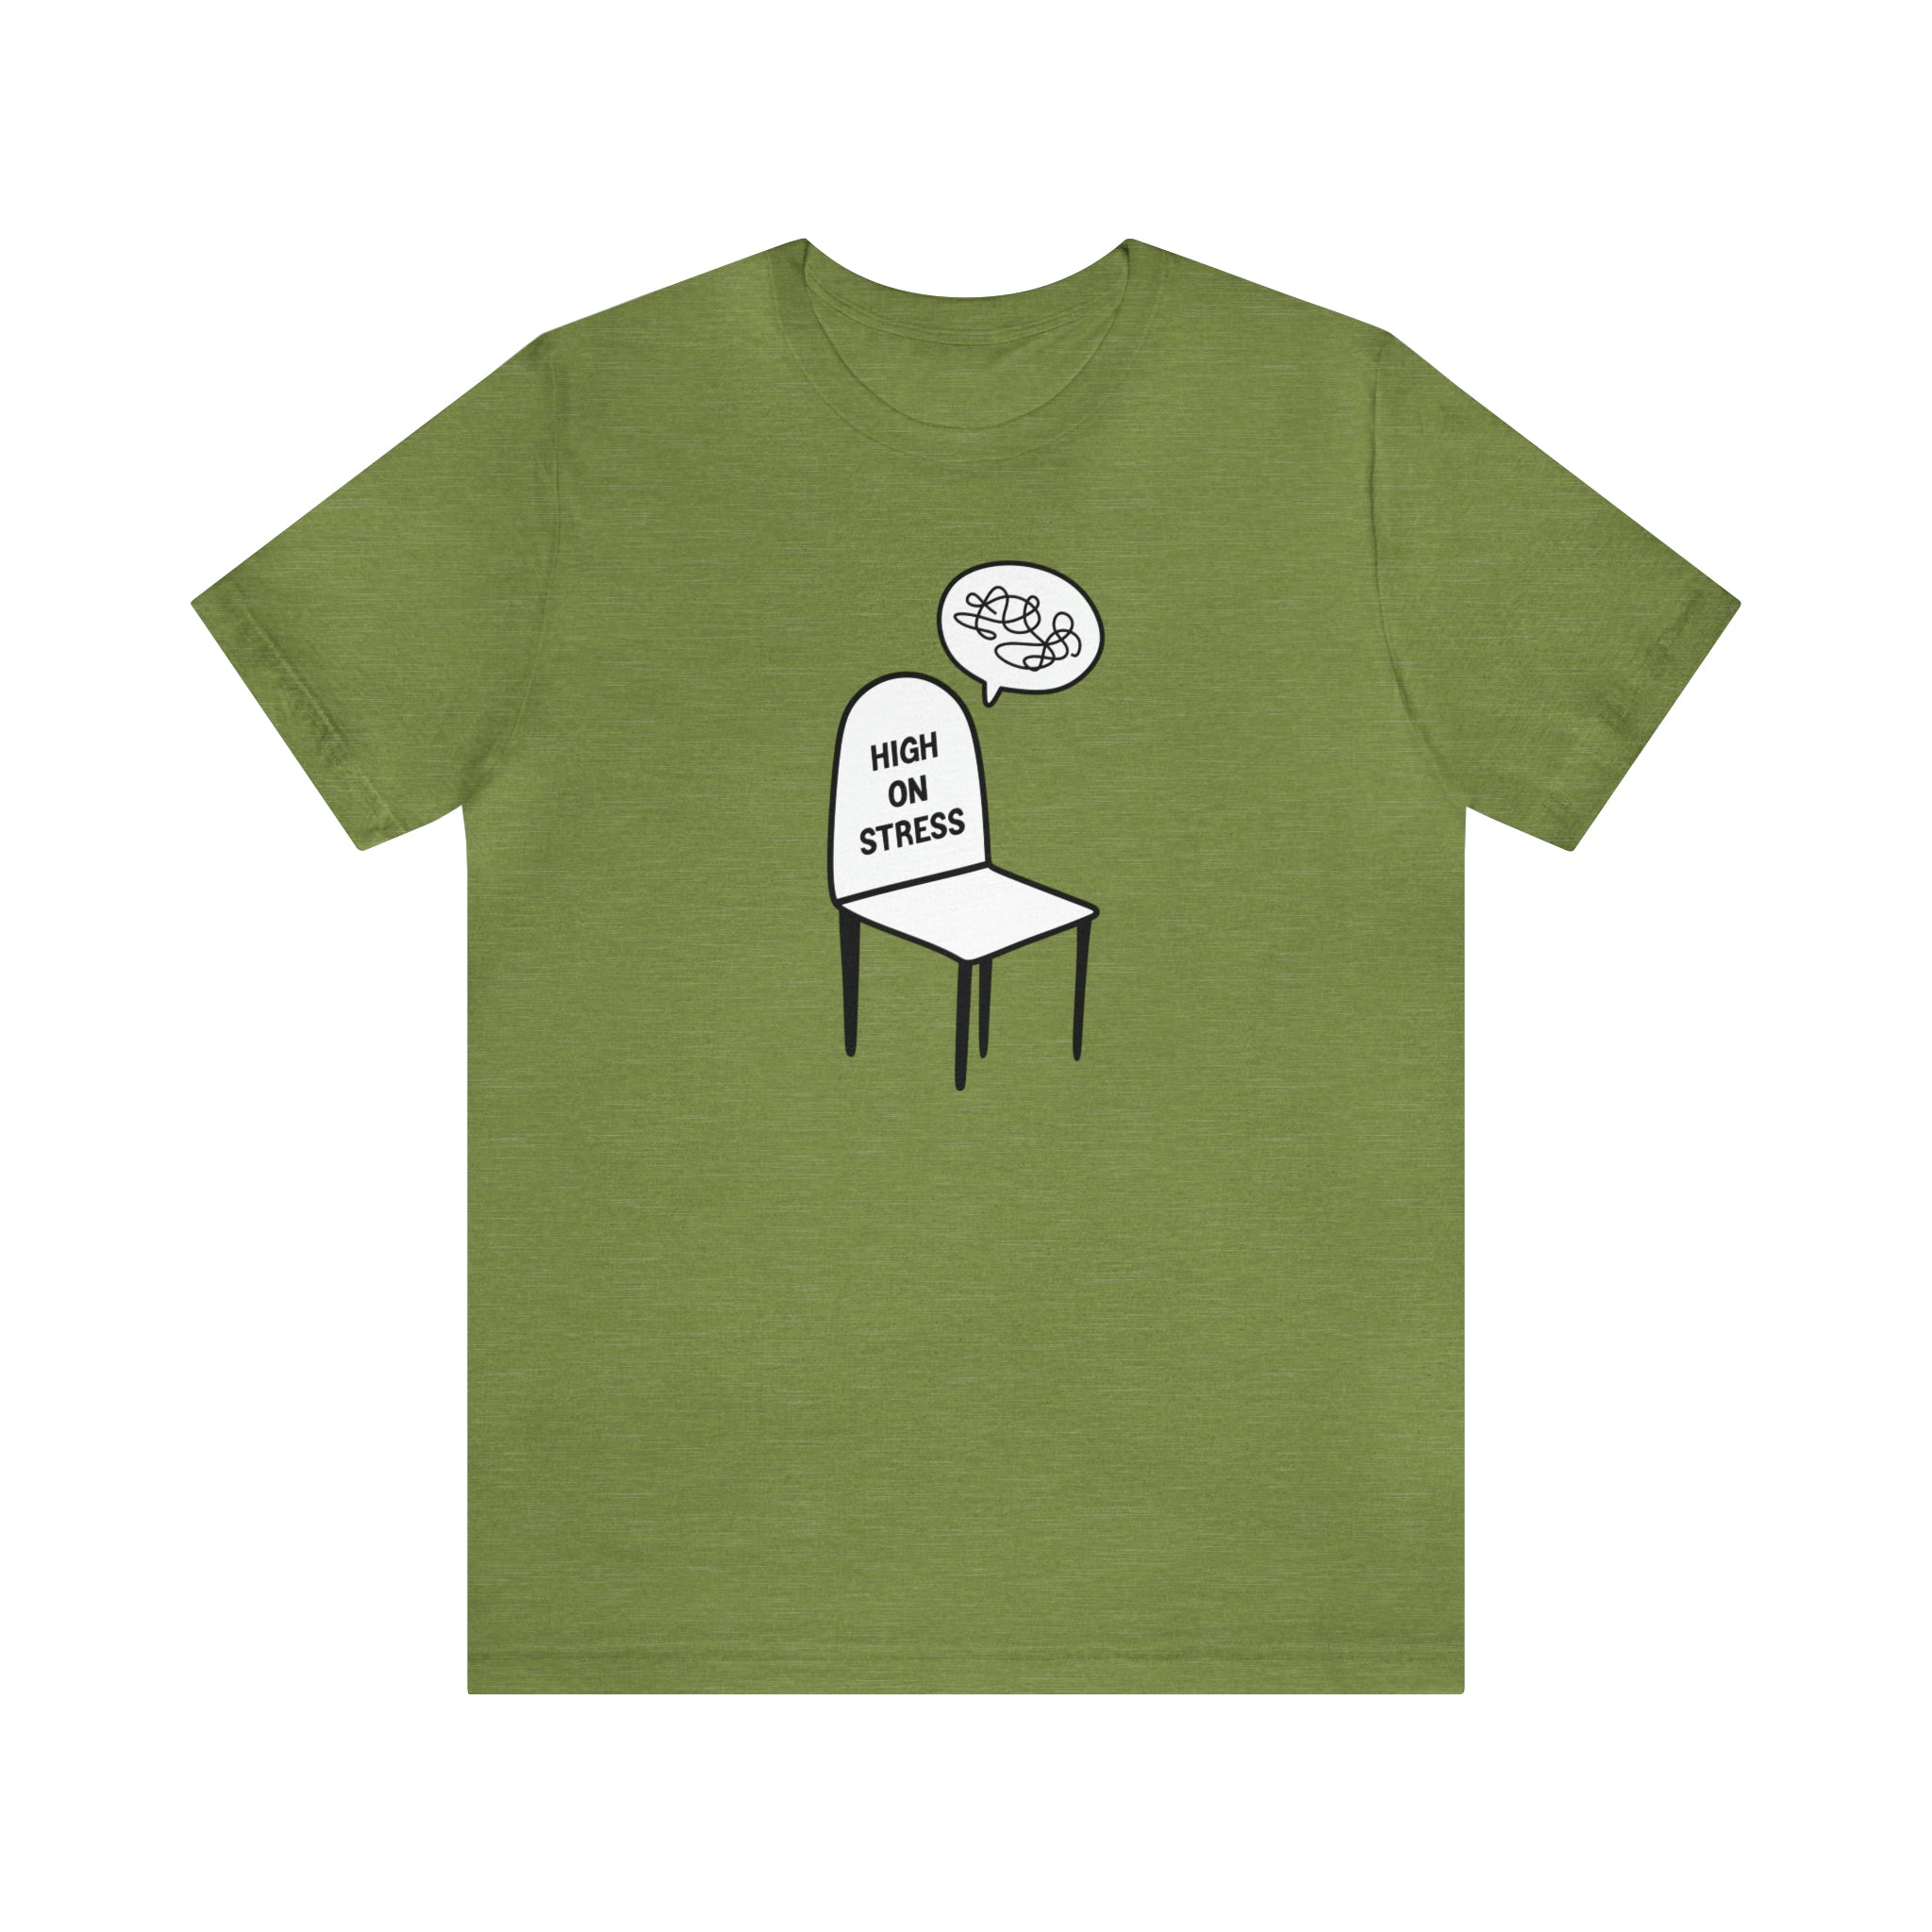 A High on Stress T-Shirt, cool as a cucumber green t-shirt with an image of a chair and a speech bubble, made of comfy cotton classic.